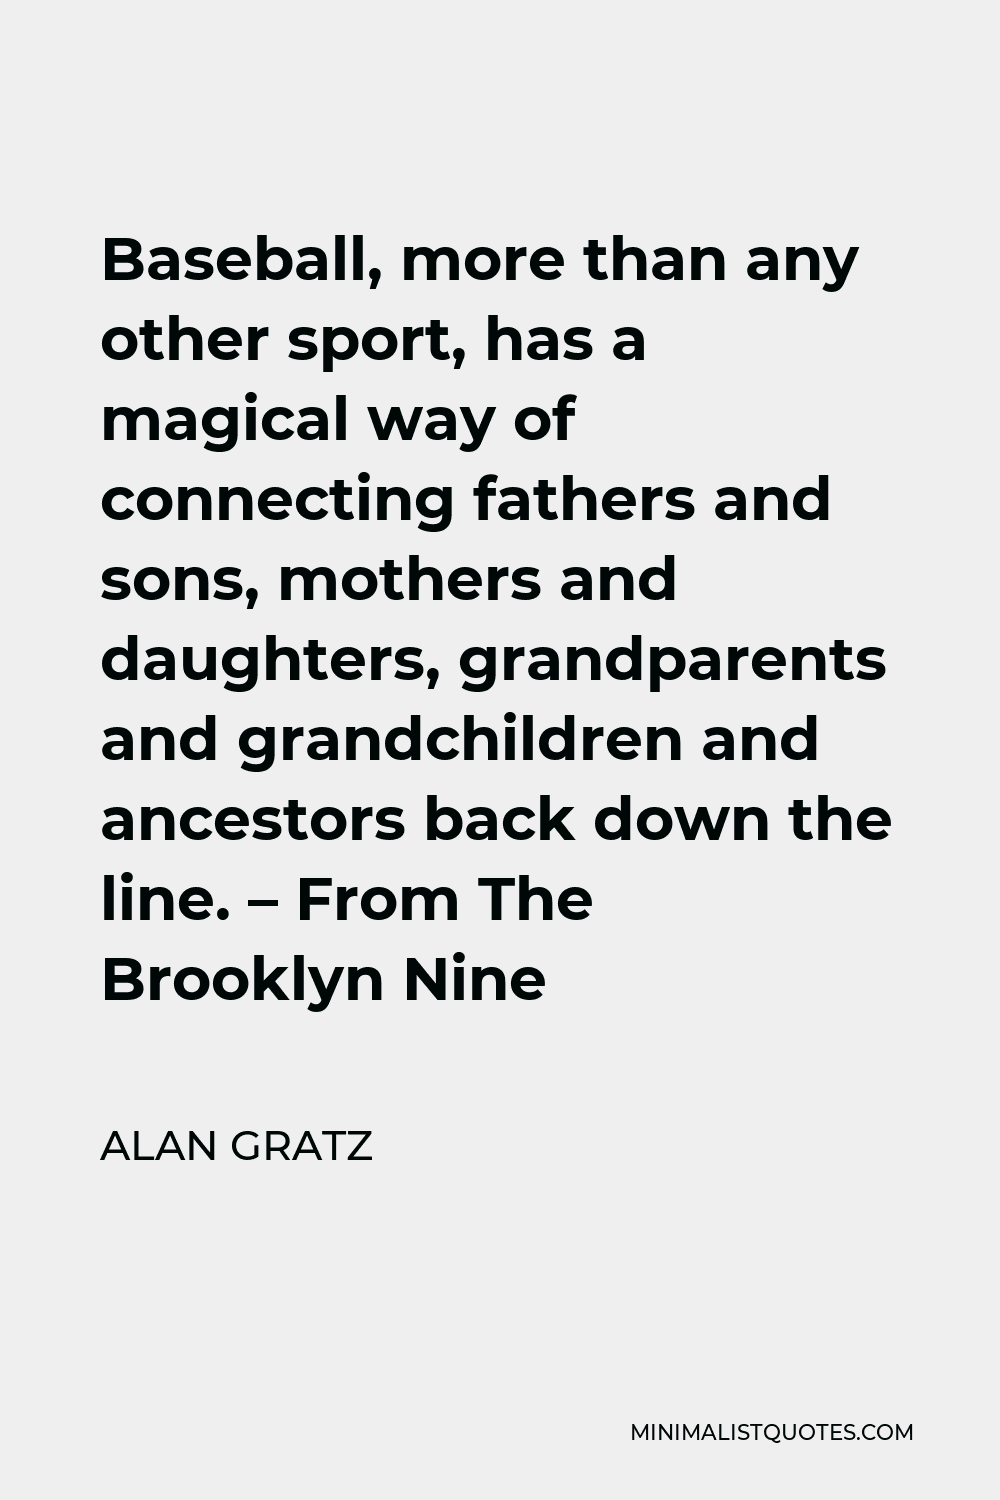 Alan Gratz Quote - Baseball, more than any other sport, has a magical way of connecting fathers and sons, mothers and daughters, grandparents and grandchildren and ancestors back down the line. – From The Brooklyn Nine